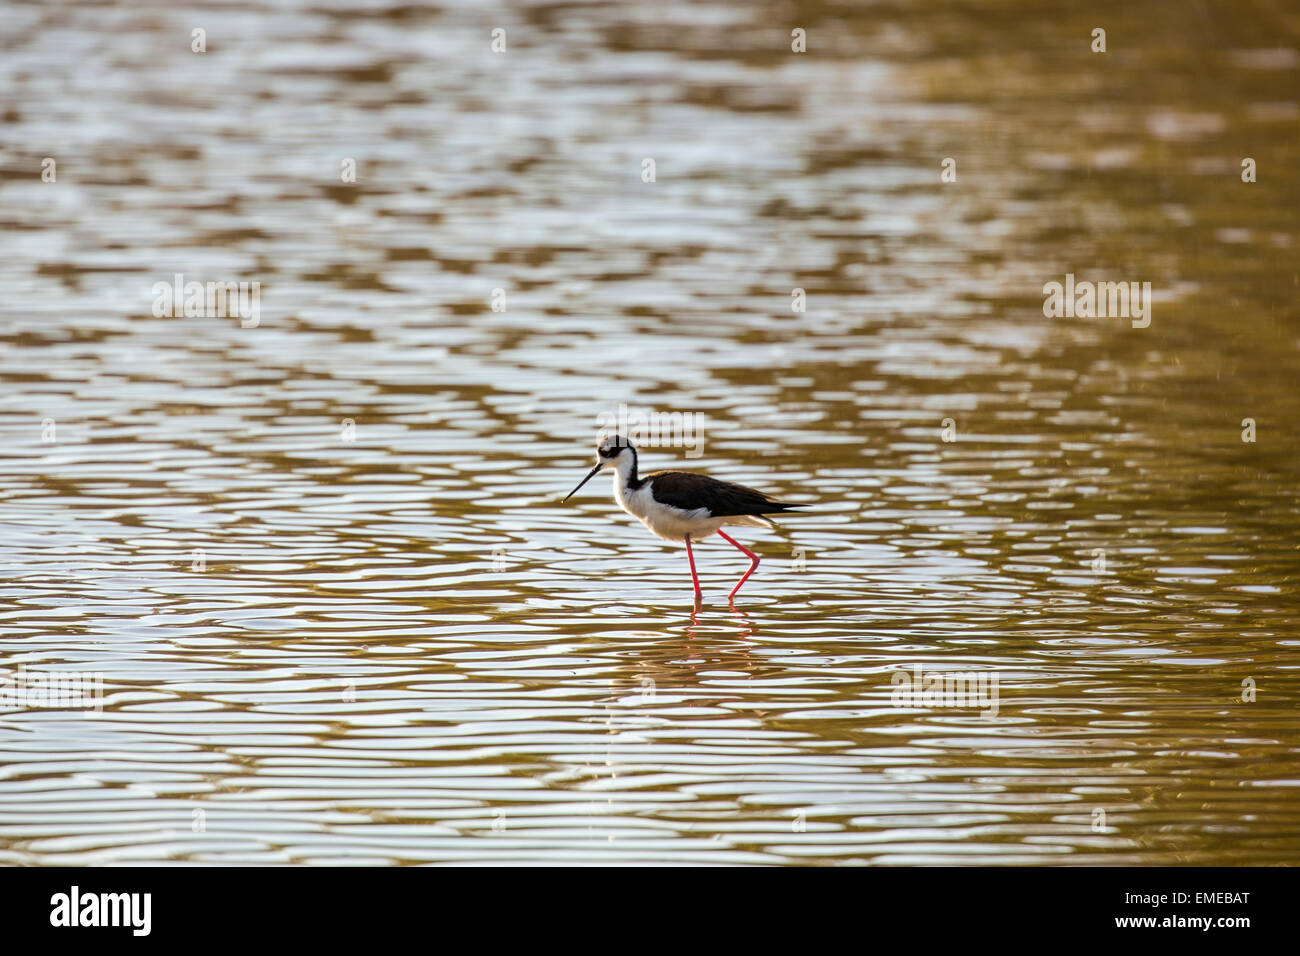 Black-necked Stilt (Himantopus mexicanus) wading at Eco pond in the Florida Everglades National Park. Stock Photo